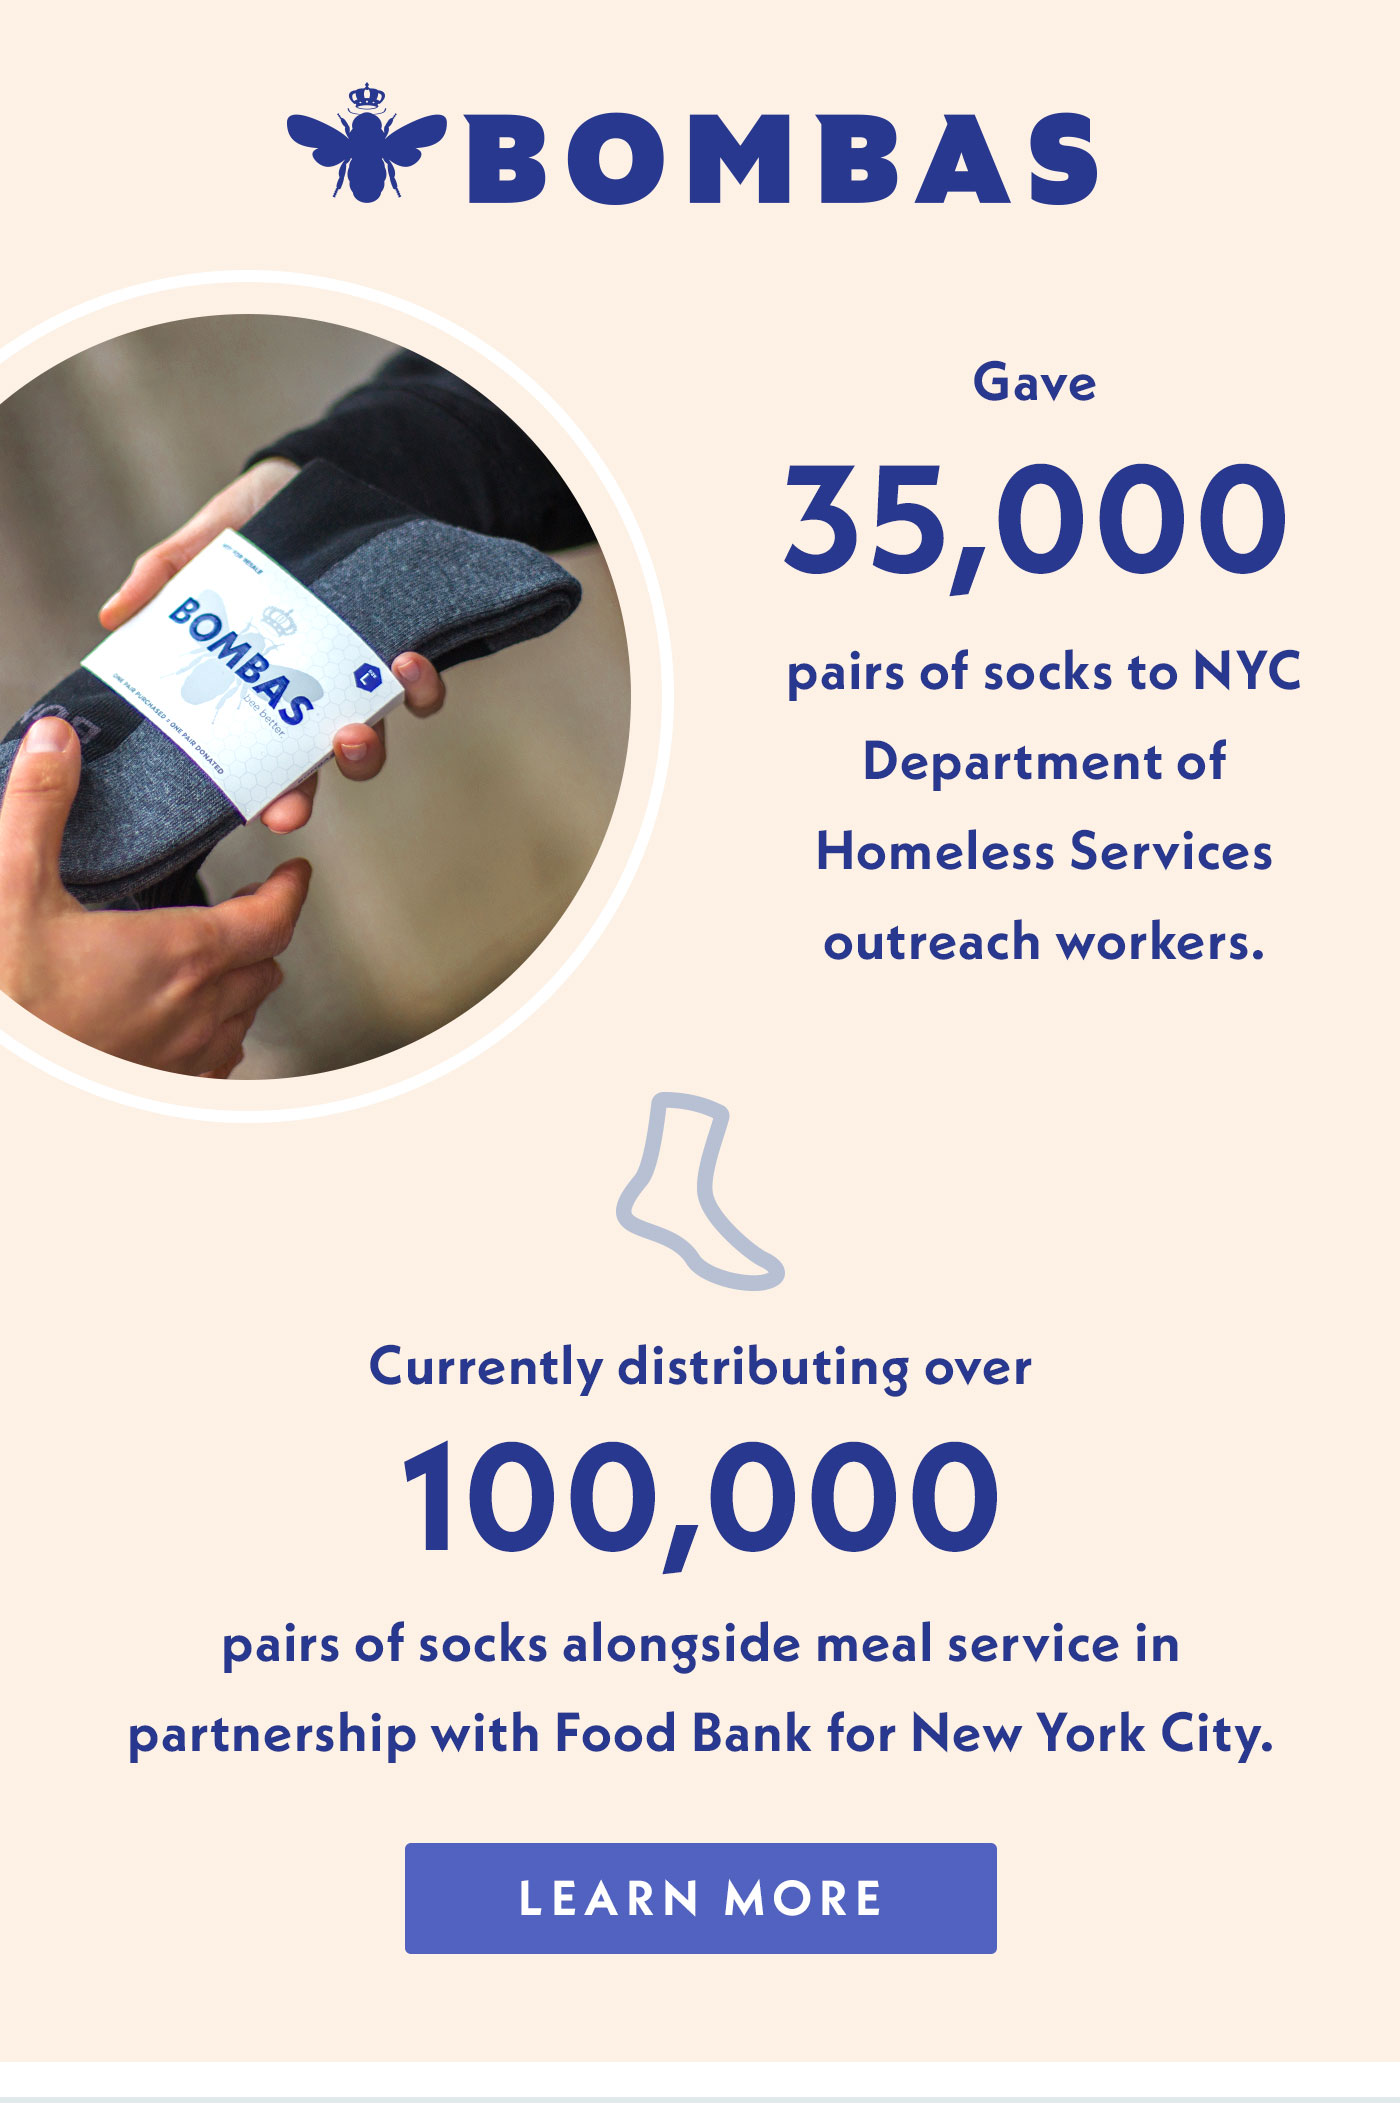 Bombas has given 35,000 pairs of socks to NYC Department Homeless Services outreach workers. They are currently distributing over 100,000 pairs of socks alongside meal service in partnership with Food Bank for New York City.